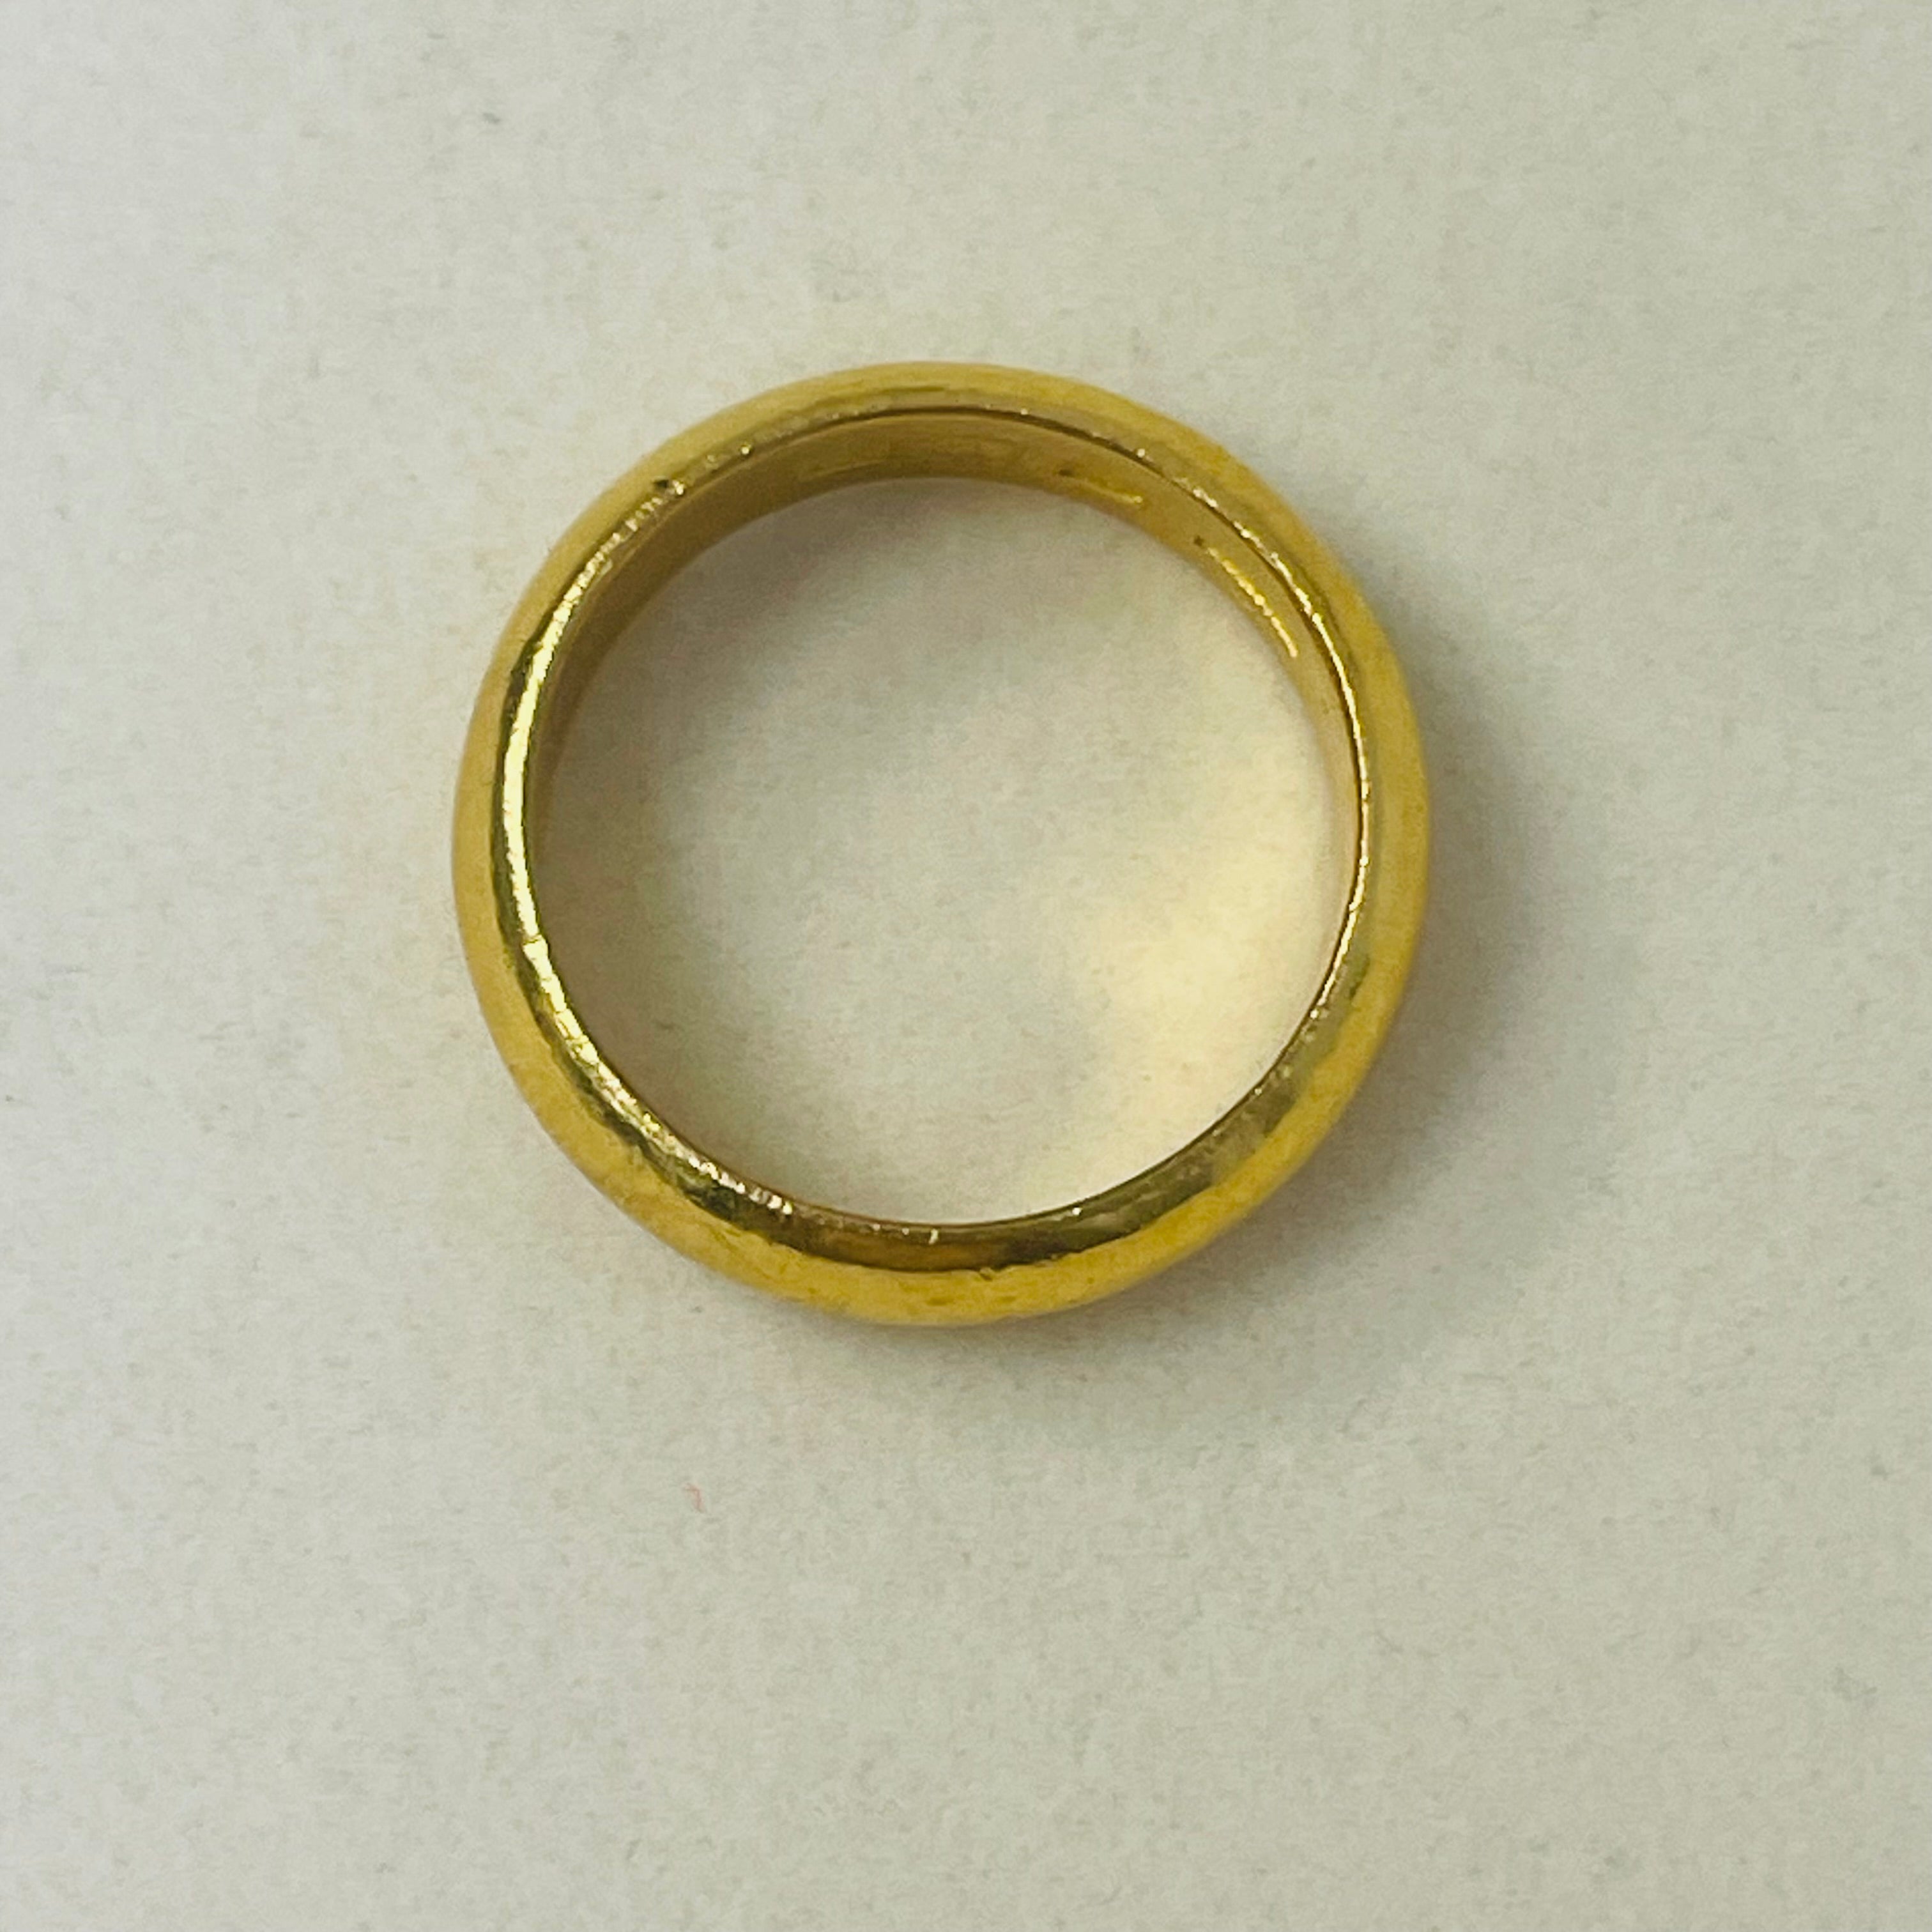 23K Solid Yellow Gold Domed Ring Size 10.25